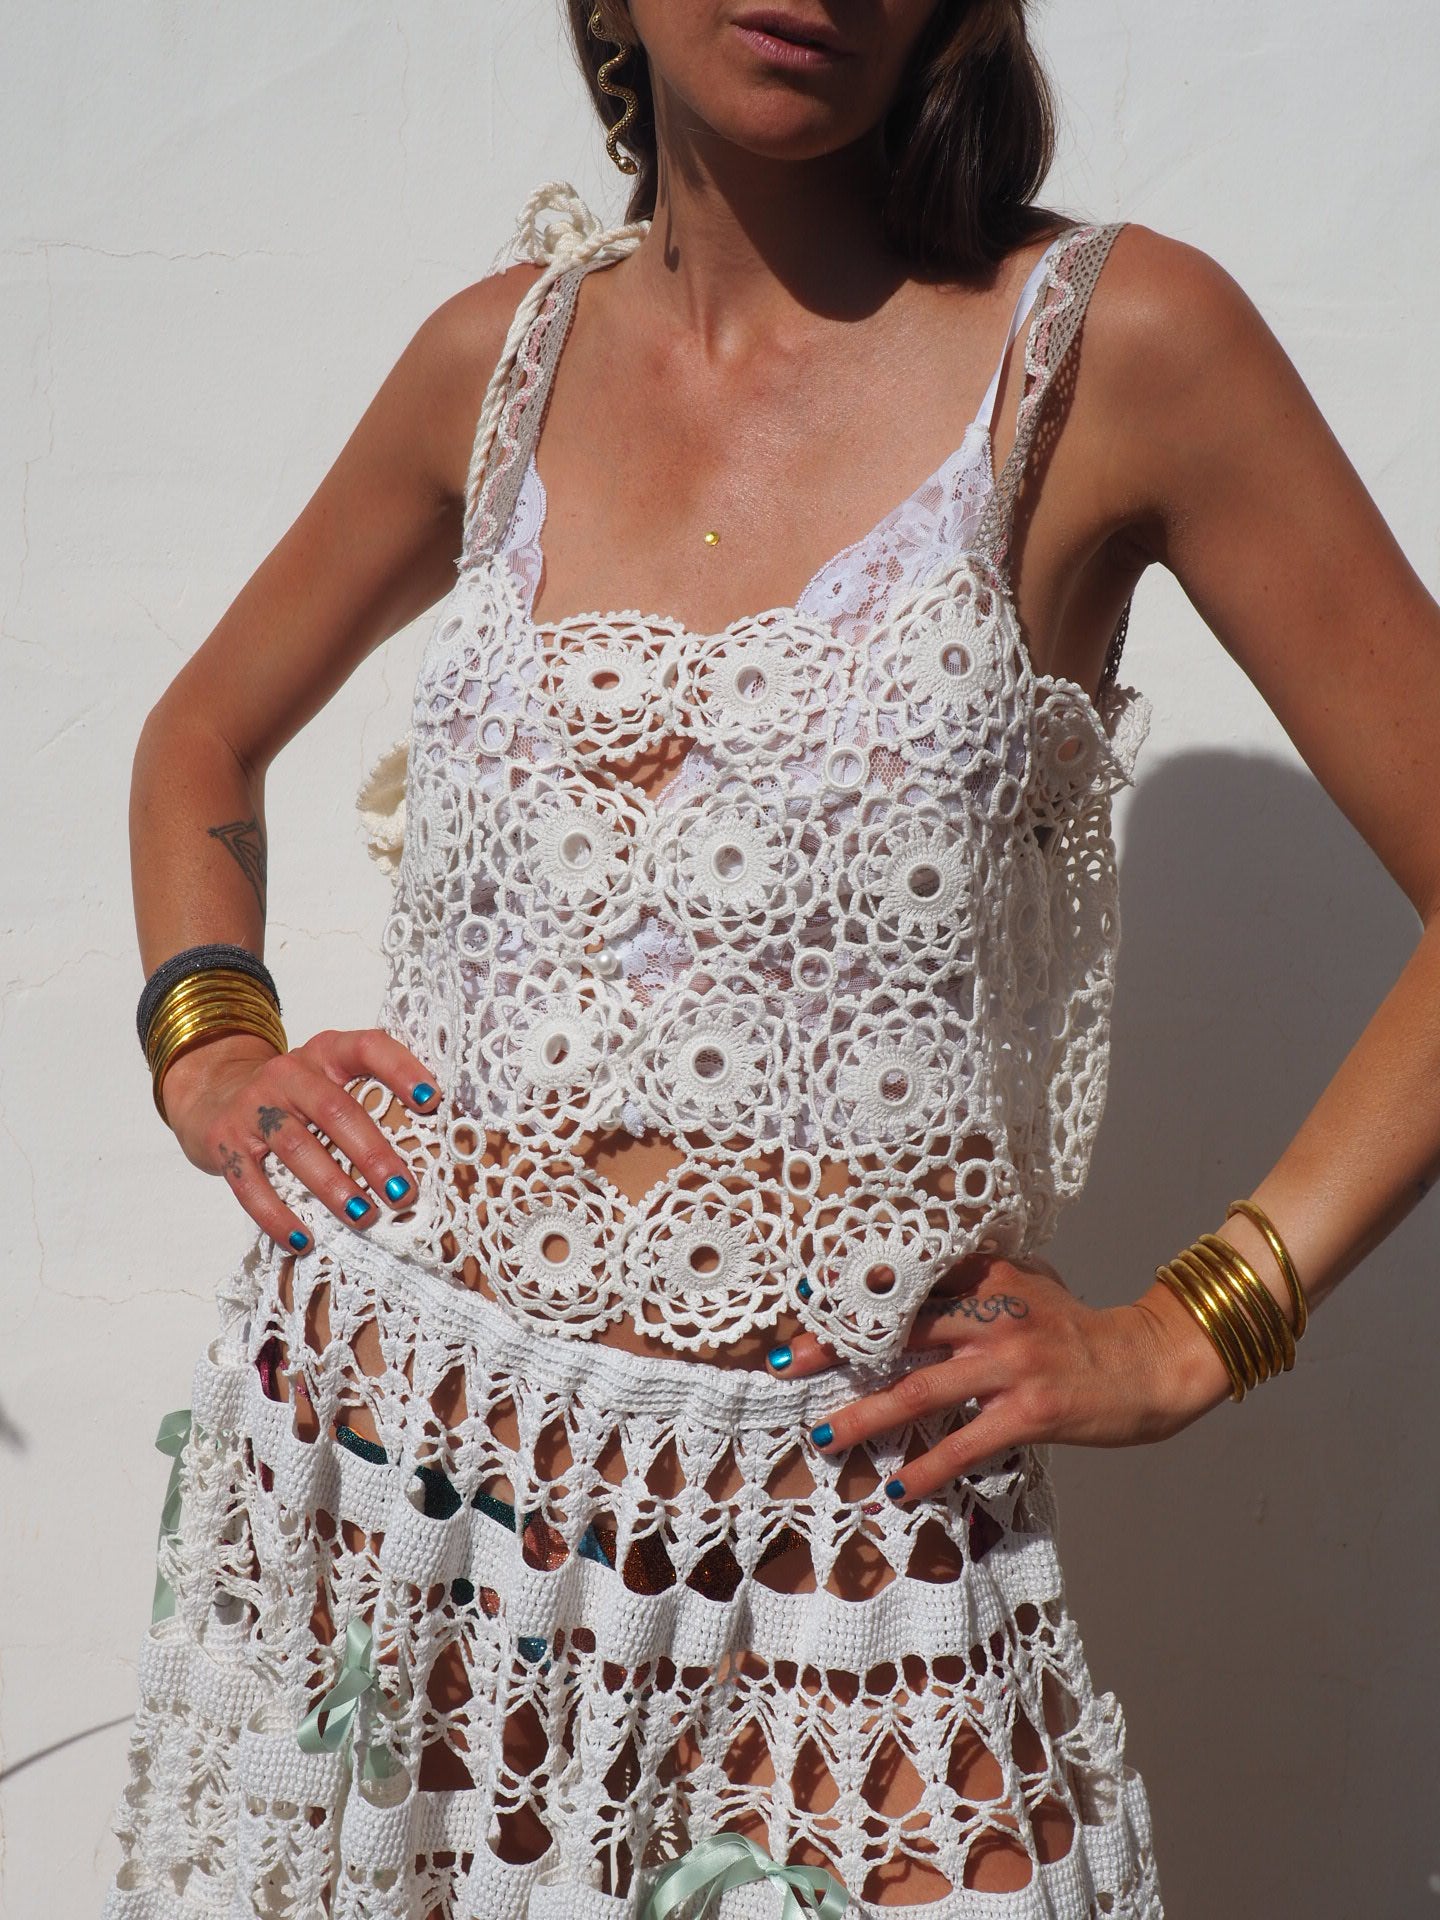 Antique white lace work up-cycled top by Vagabond Ibiza